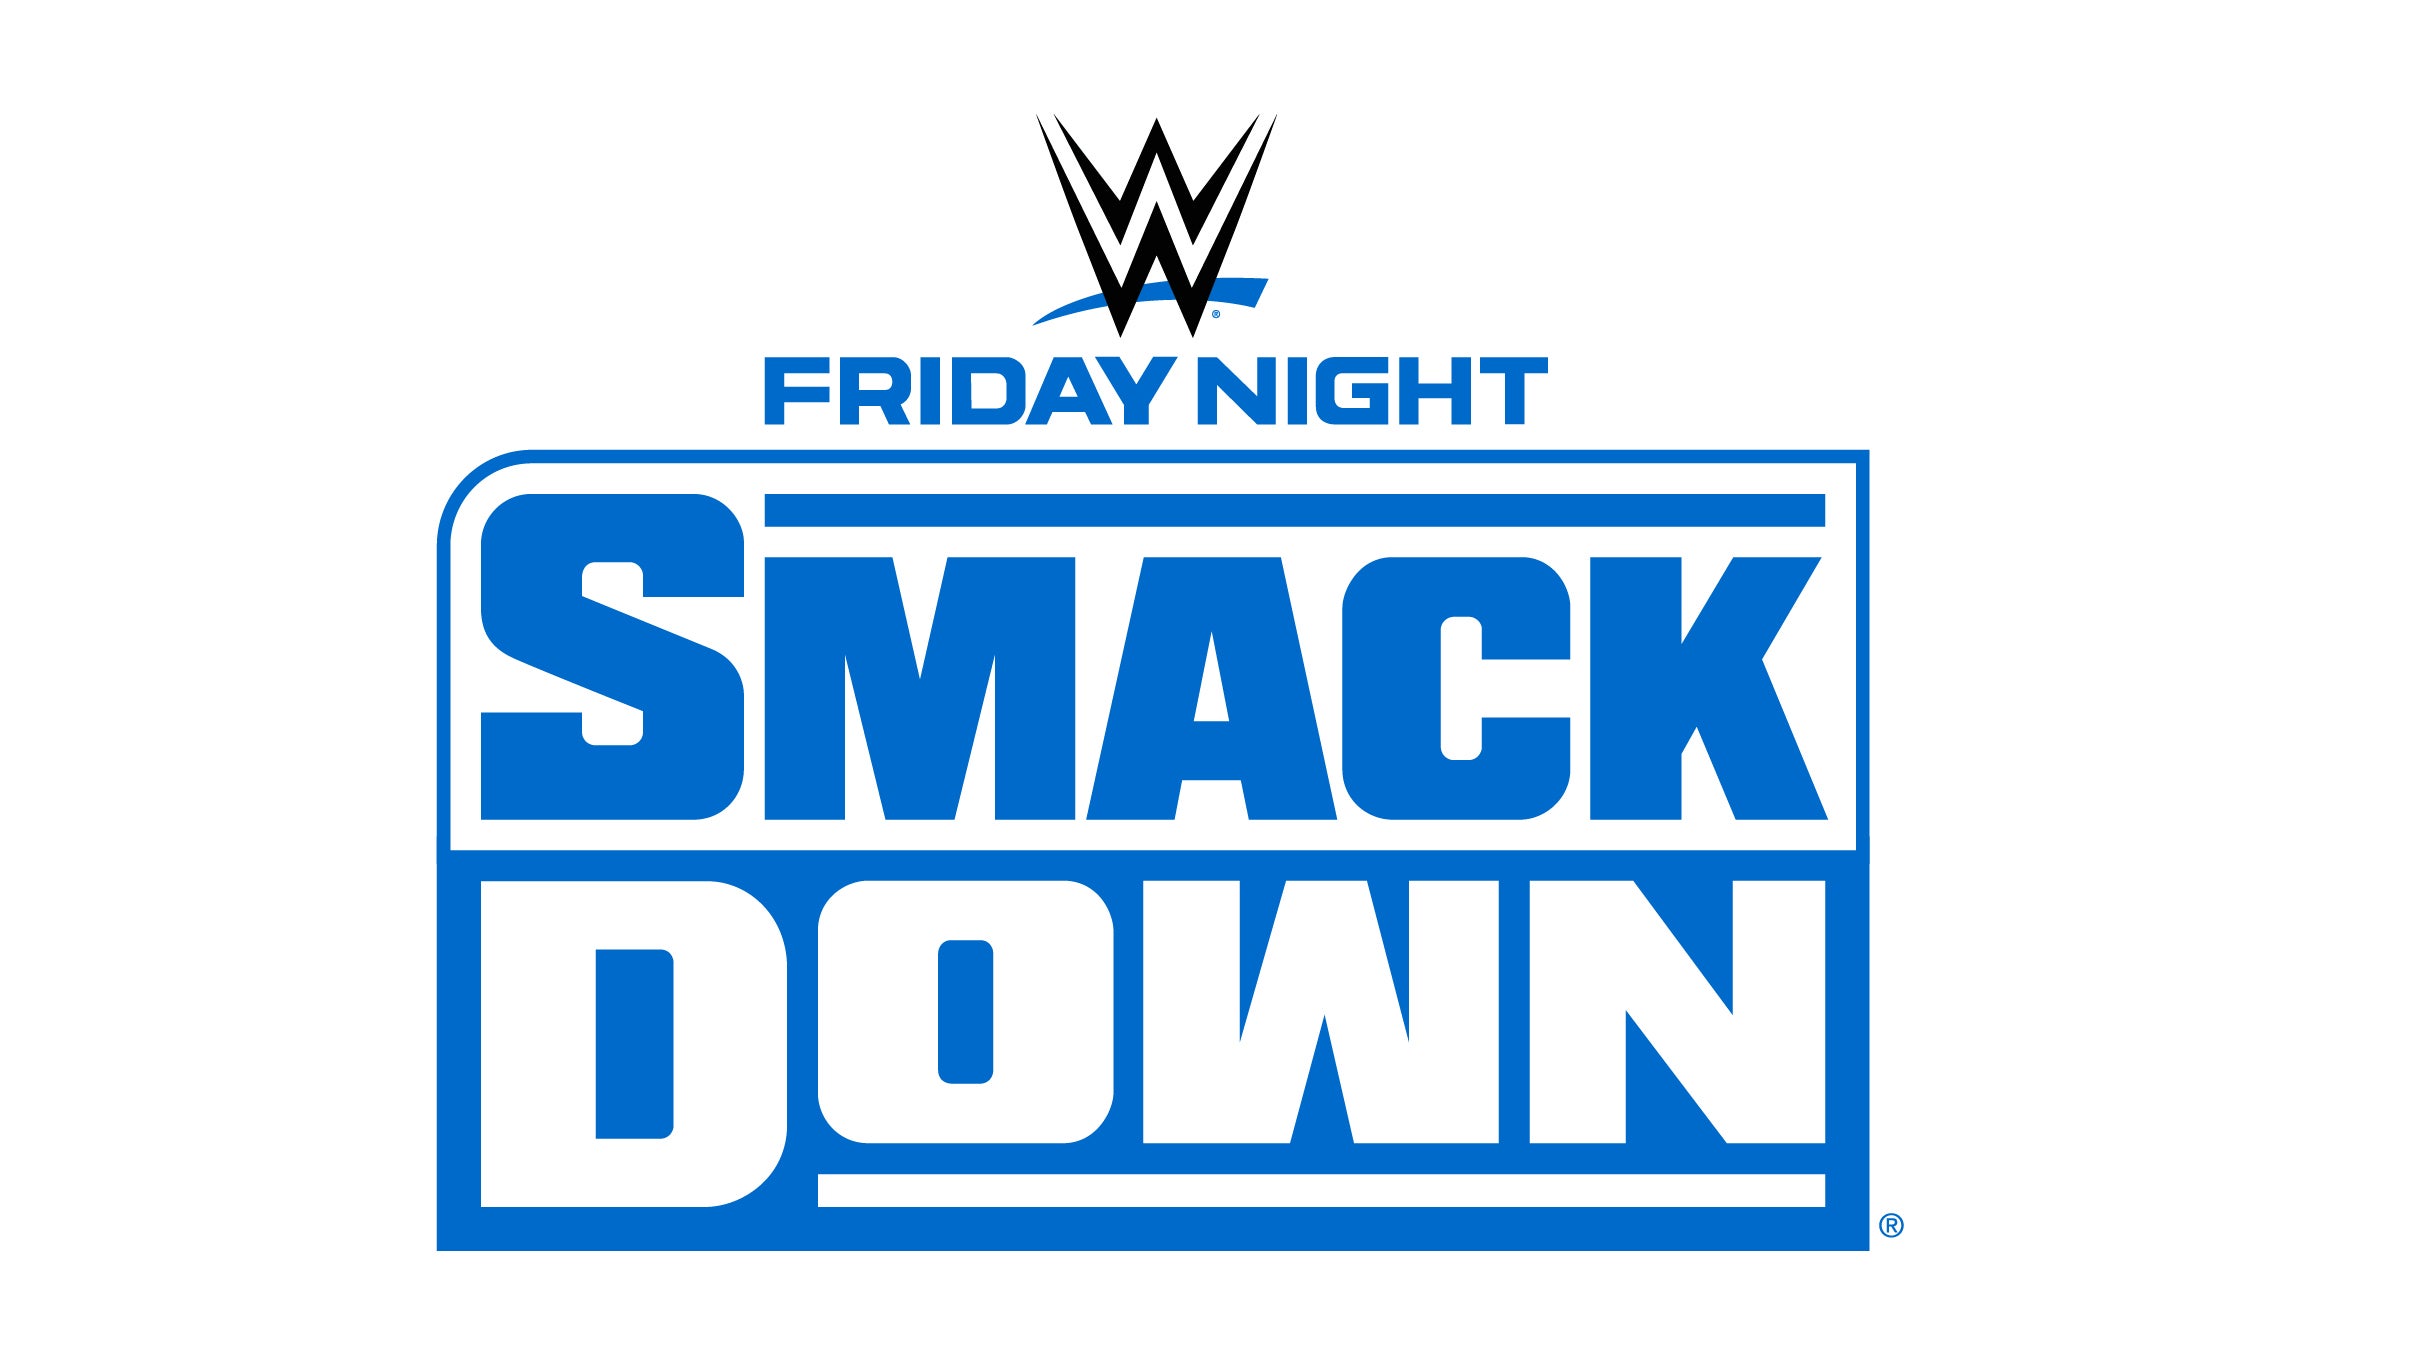 WWE FRIDAY NIGHT SMACKDOWN + CLASH AT THE CASTLE - COMBO TICKET in Glasgow promo photo for OVO presale offer code